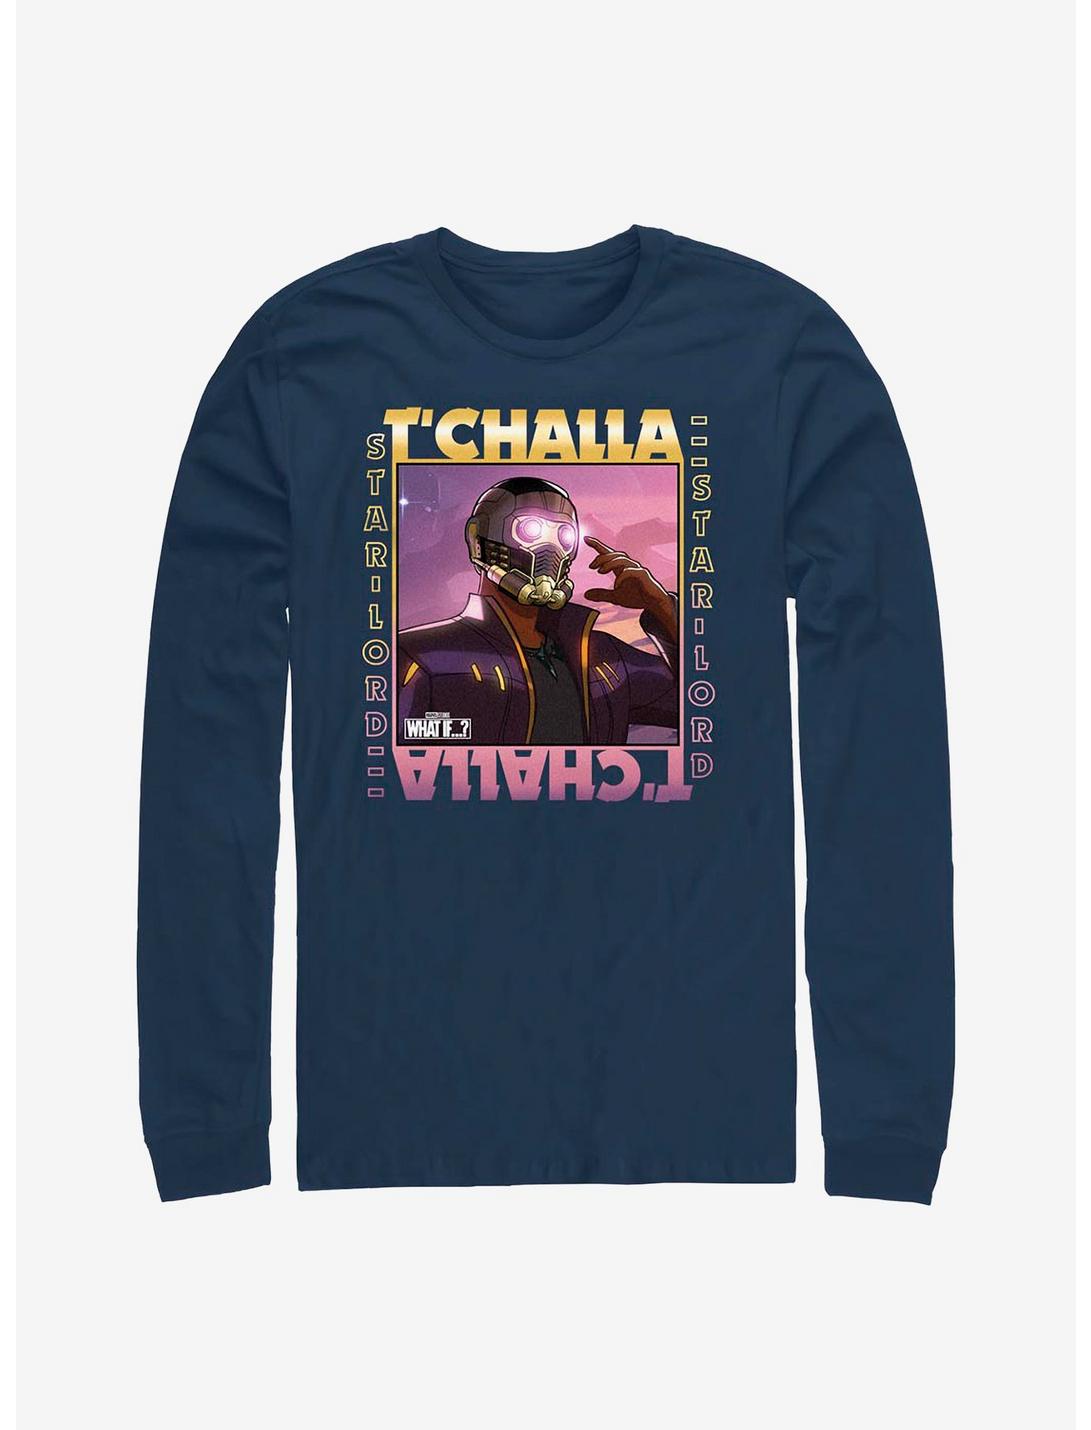 Marvel What If...? T'Challa Was Star-Lord Frame Long-Sleeve T-Shirt, NAVY, hi-res